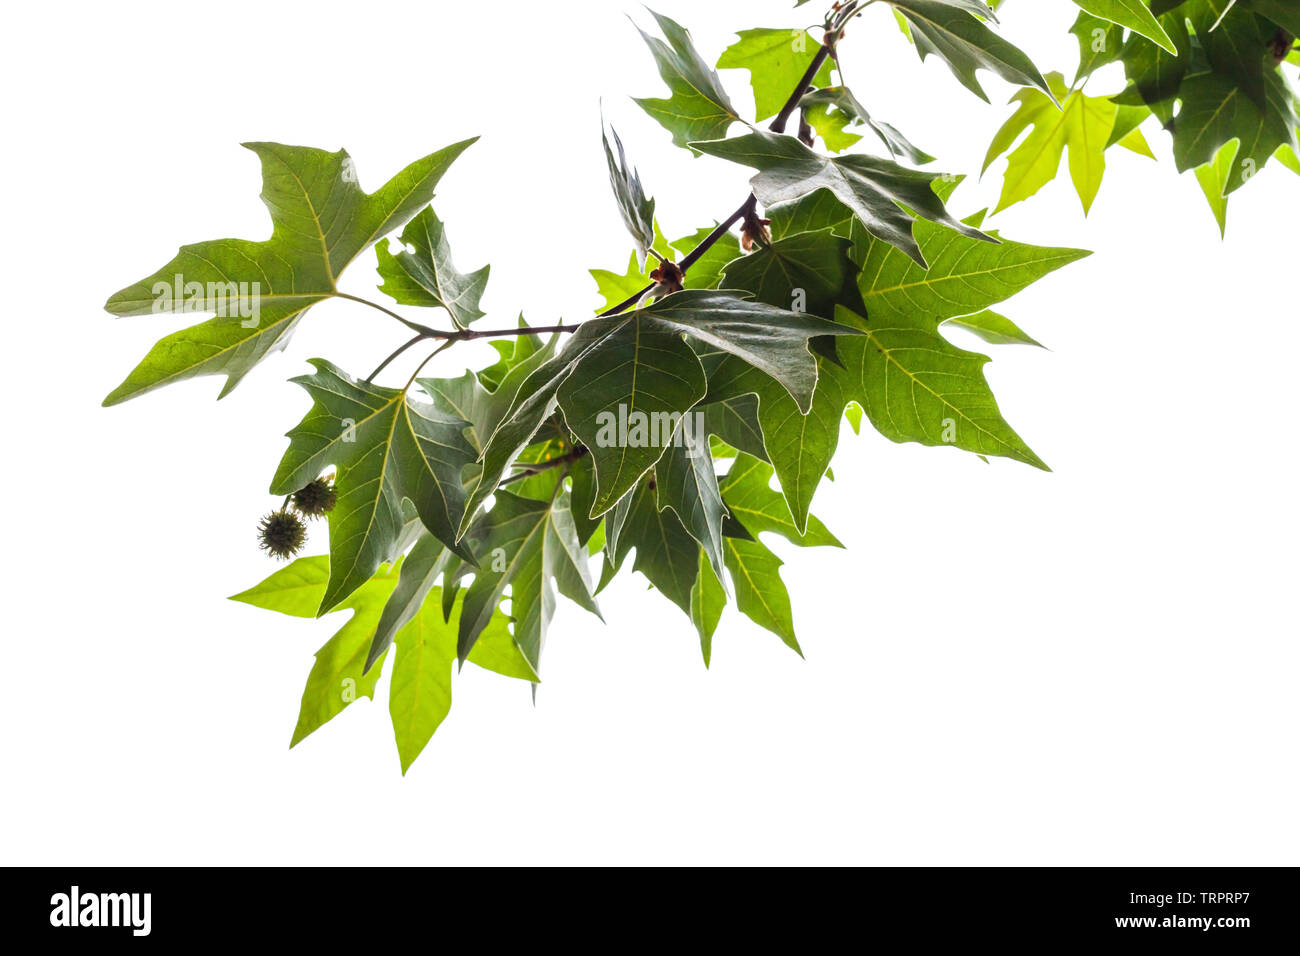 Green leaves and fruits on a branch of a London plane tree isolated on white background Stock Photo